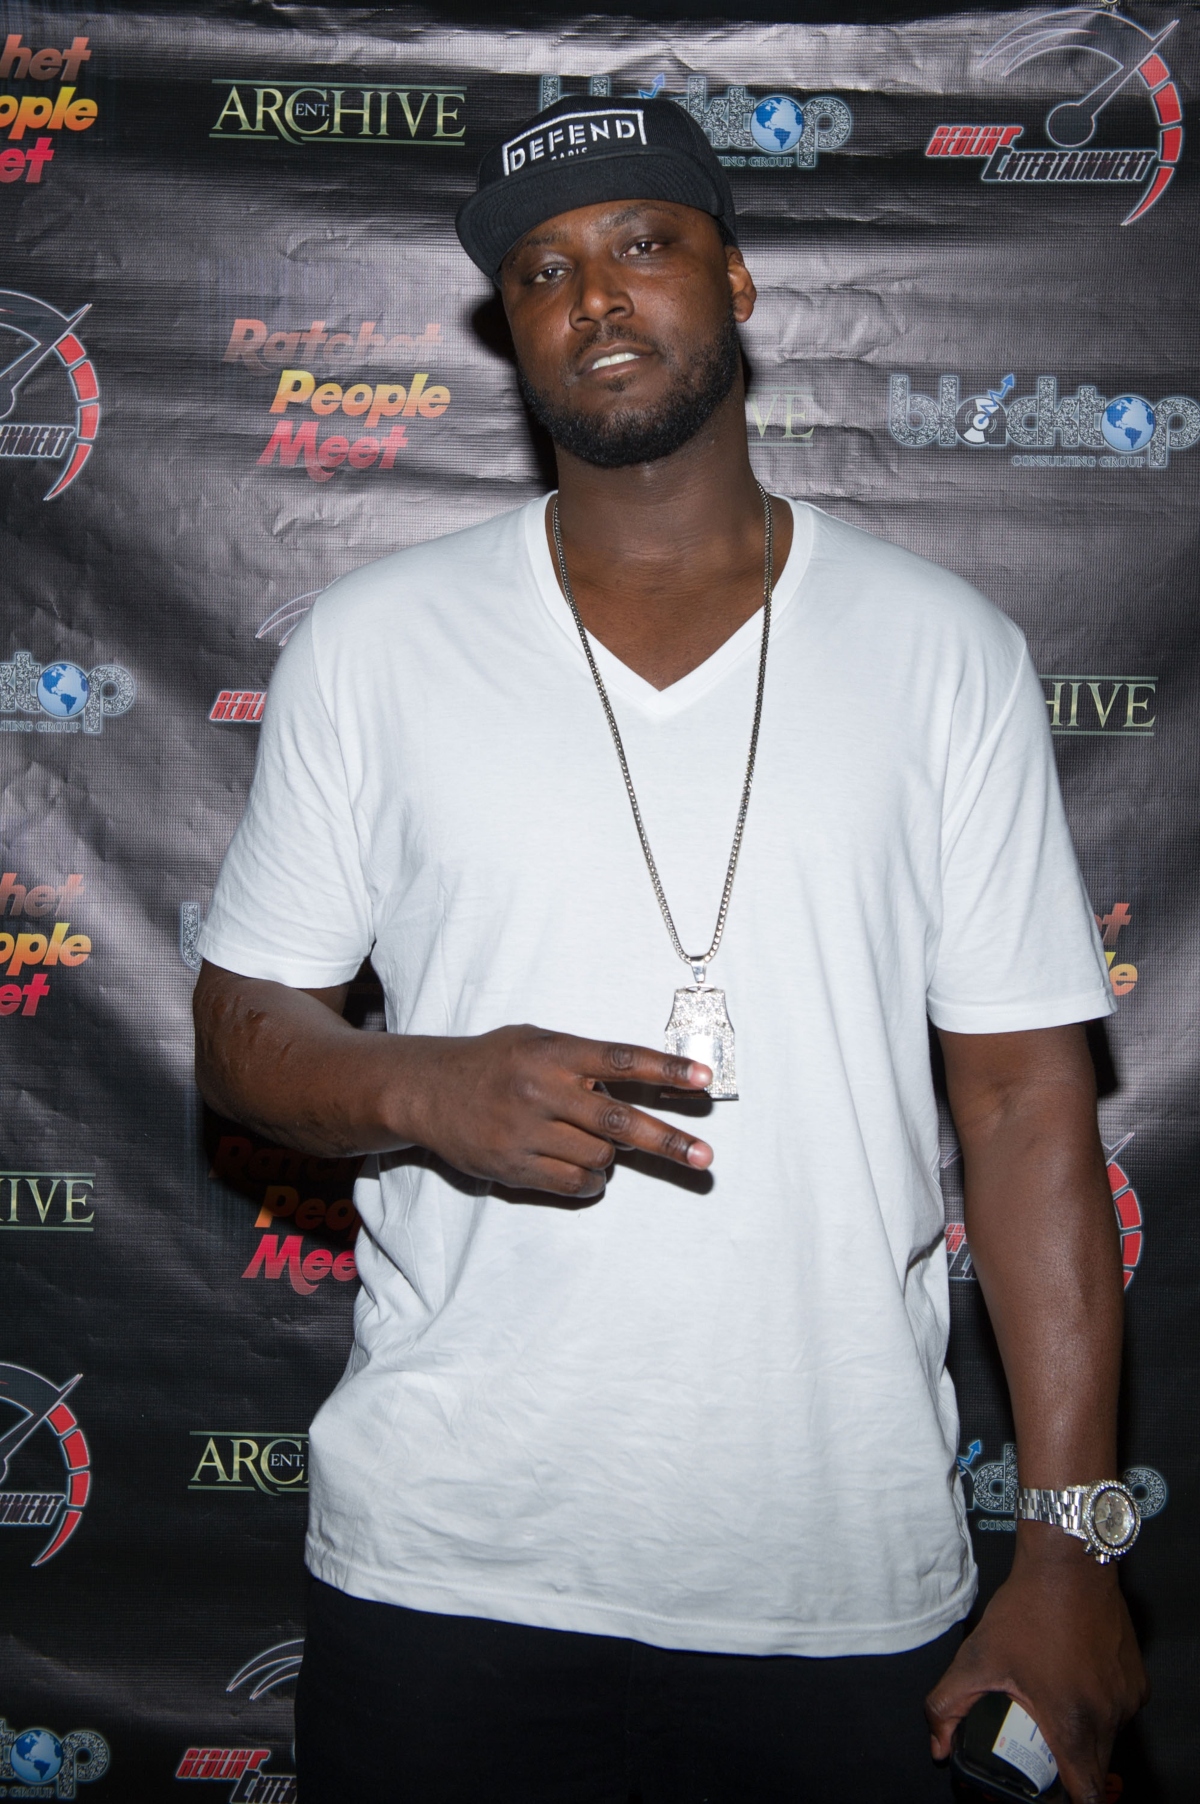 Kwame Brown attends Ratchet People Meet presents 'Socially Profiled' at Rialto Center for the Arts on July 10, 2015 in Atlanta, Georgia